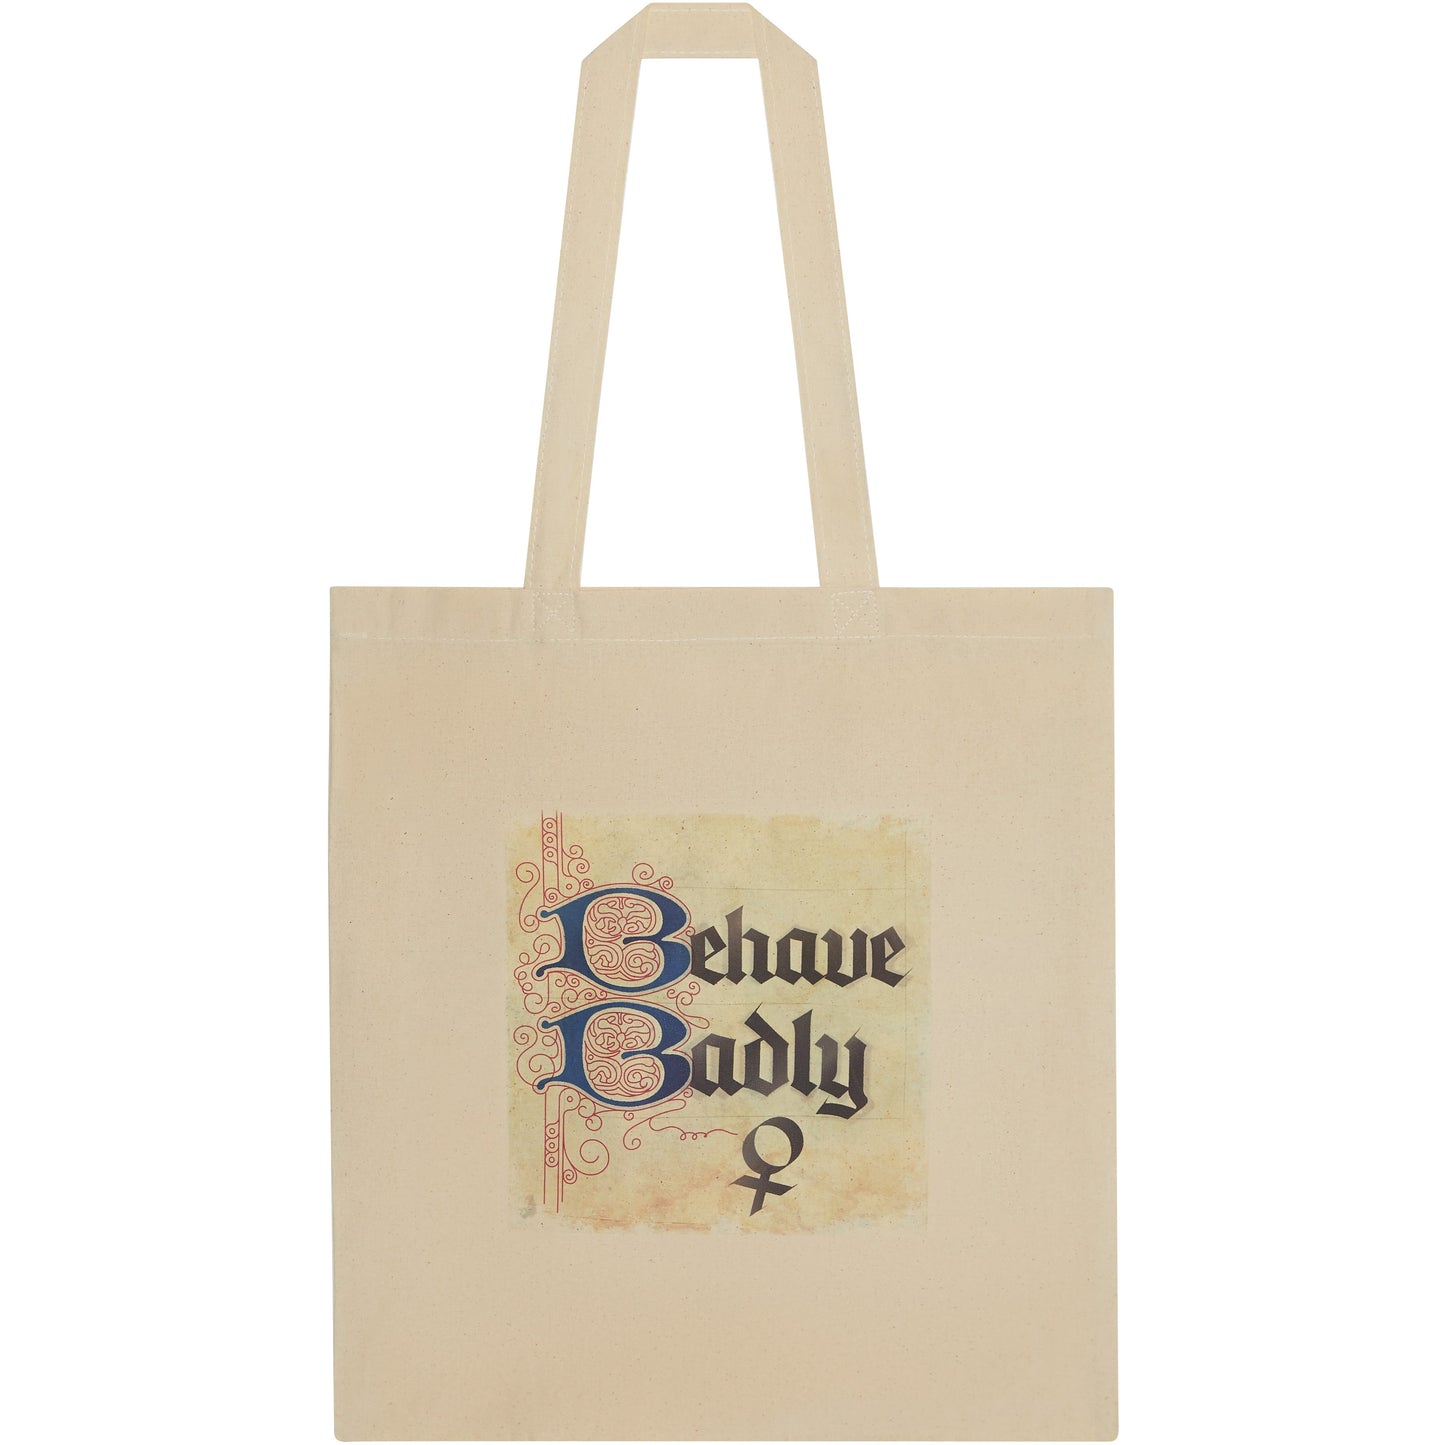 Tote bag - Behave Badly illuminated manuscript print. Inspired by the Rising Tide exhbition at Cambridge University Library, brought to you by CuratingCambridge.com